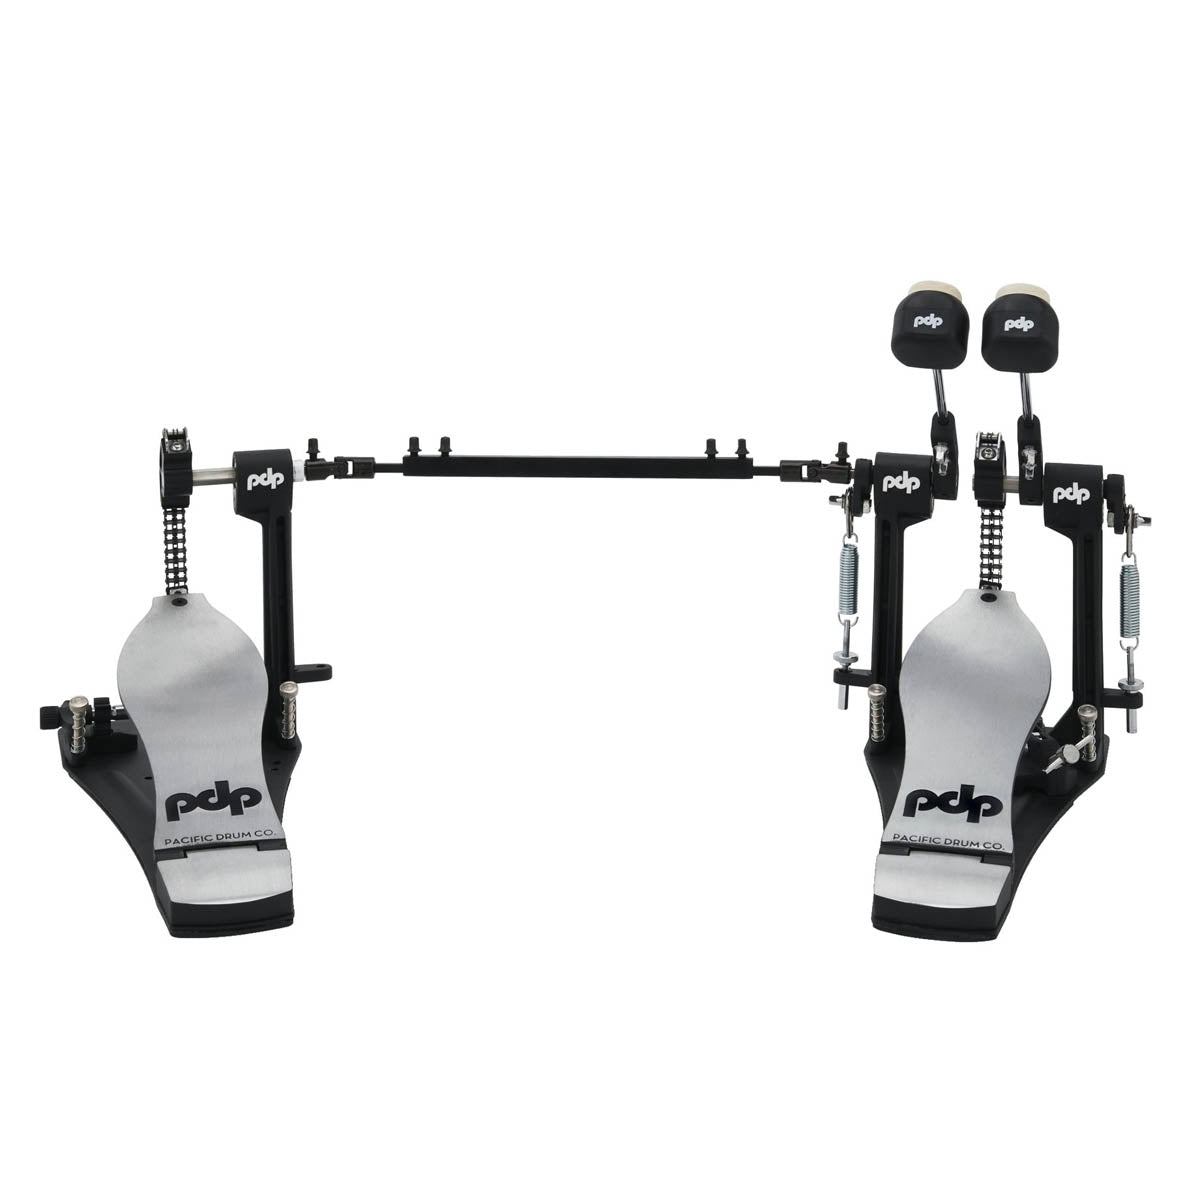 PDP Concept Series Double Bass Drum Pedal - Chain Drive